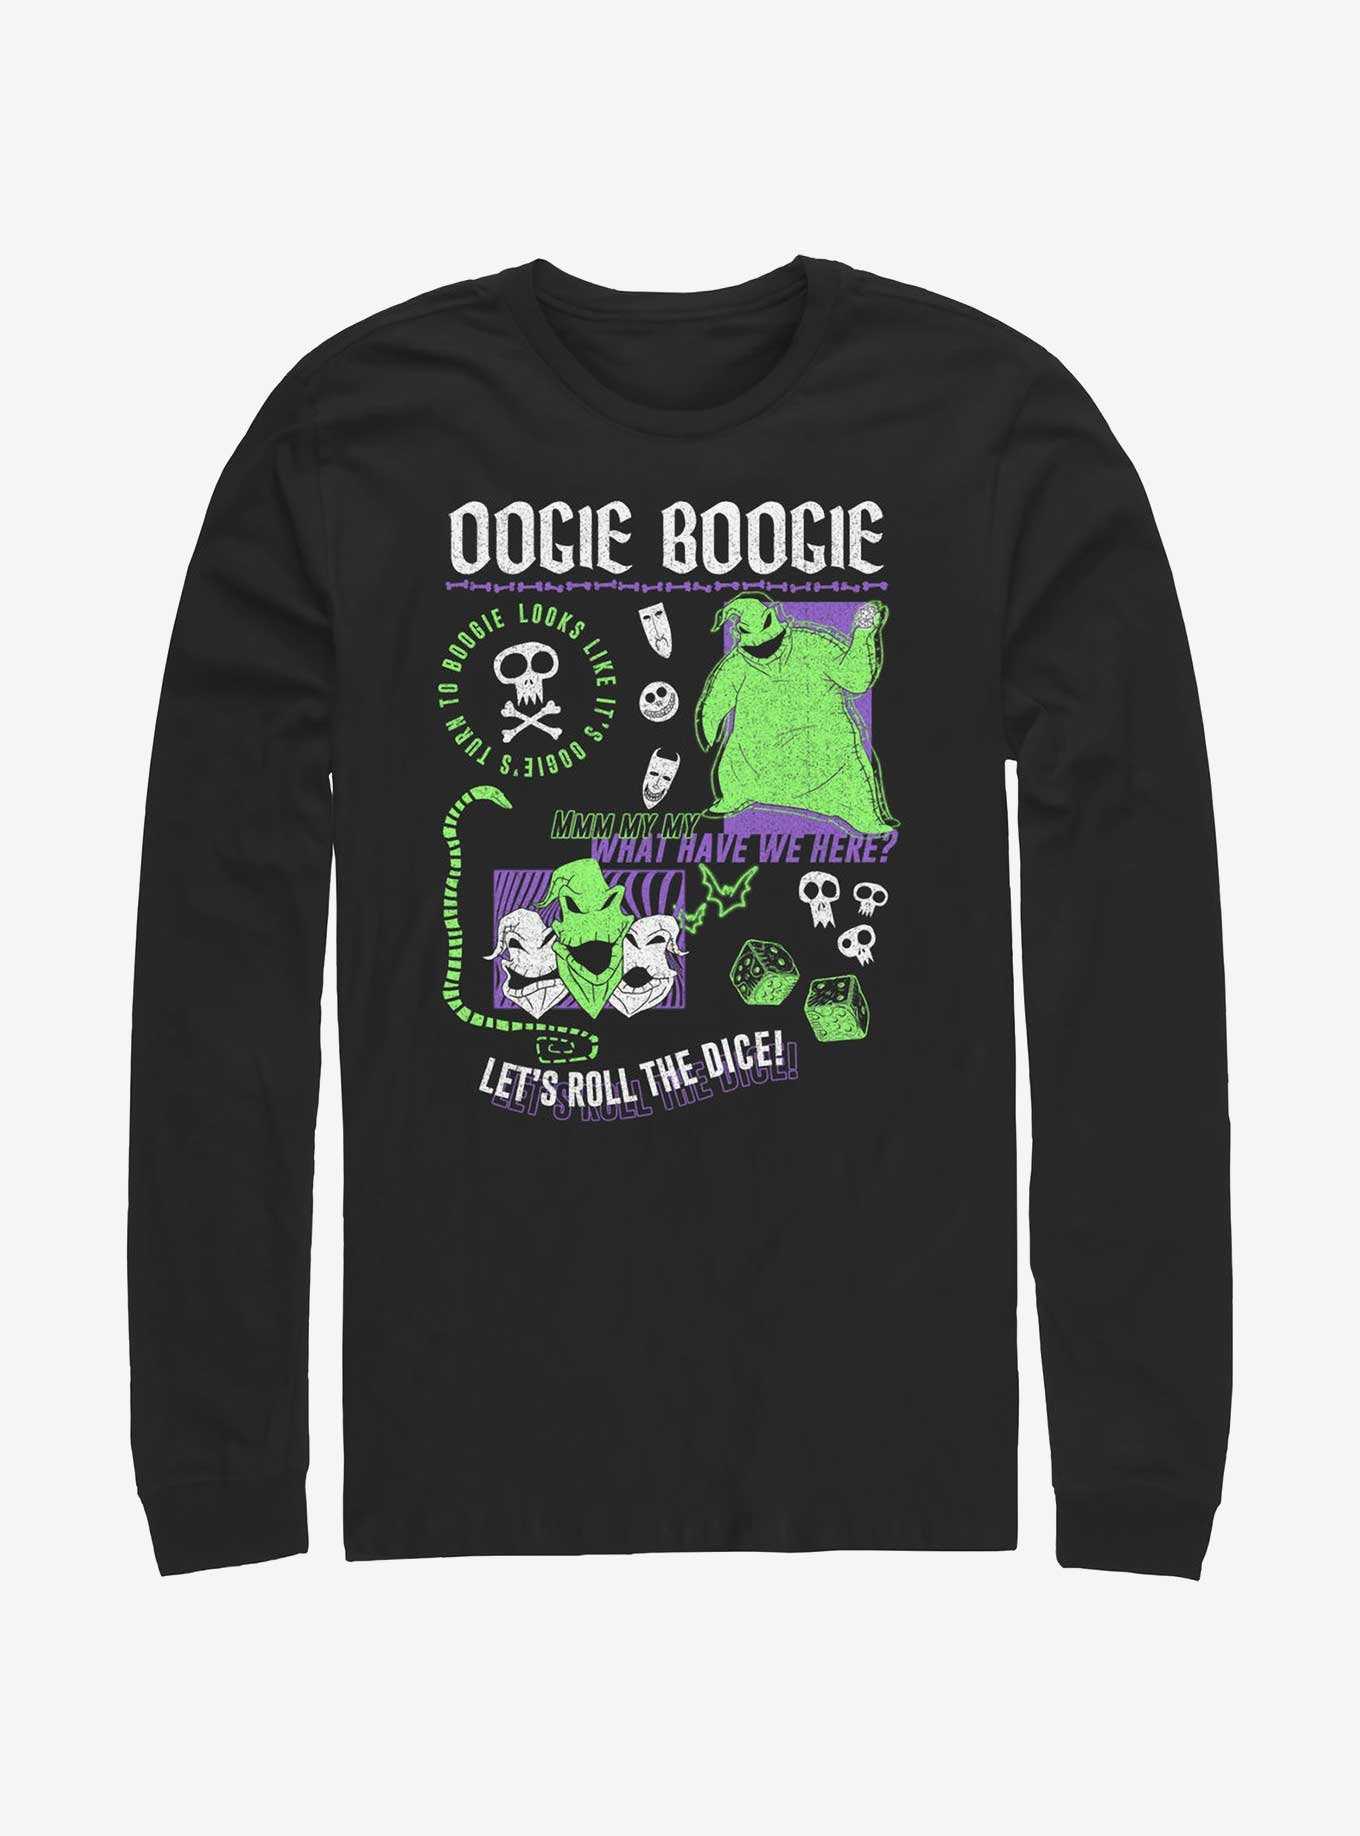 Disney The Nightmare Before Christmas Oogie Boogie Let's Roll The Dice Long-Sleeve T-Shirt, , hi-res